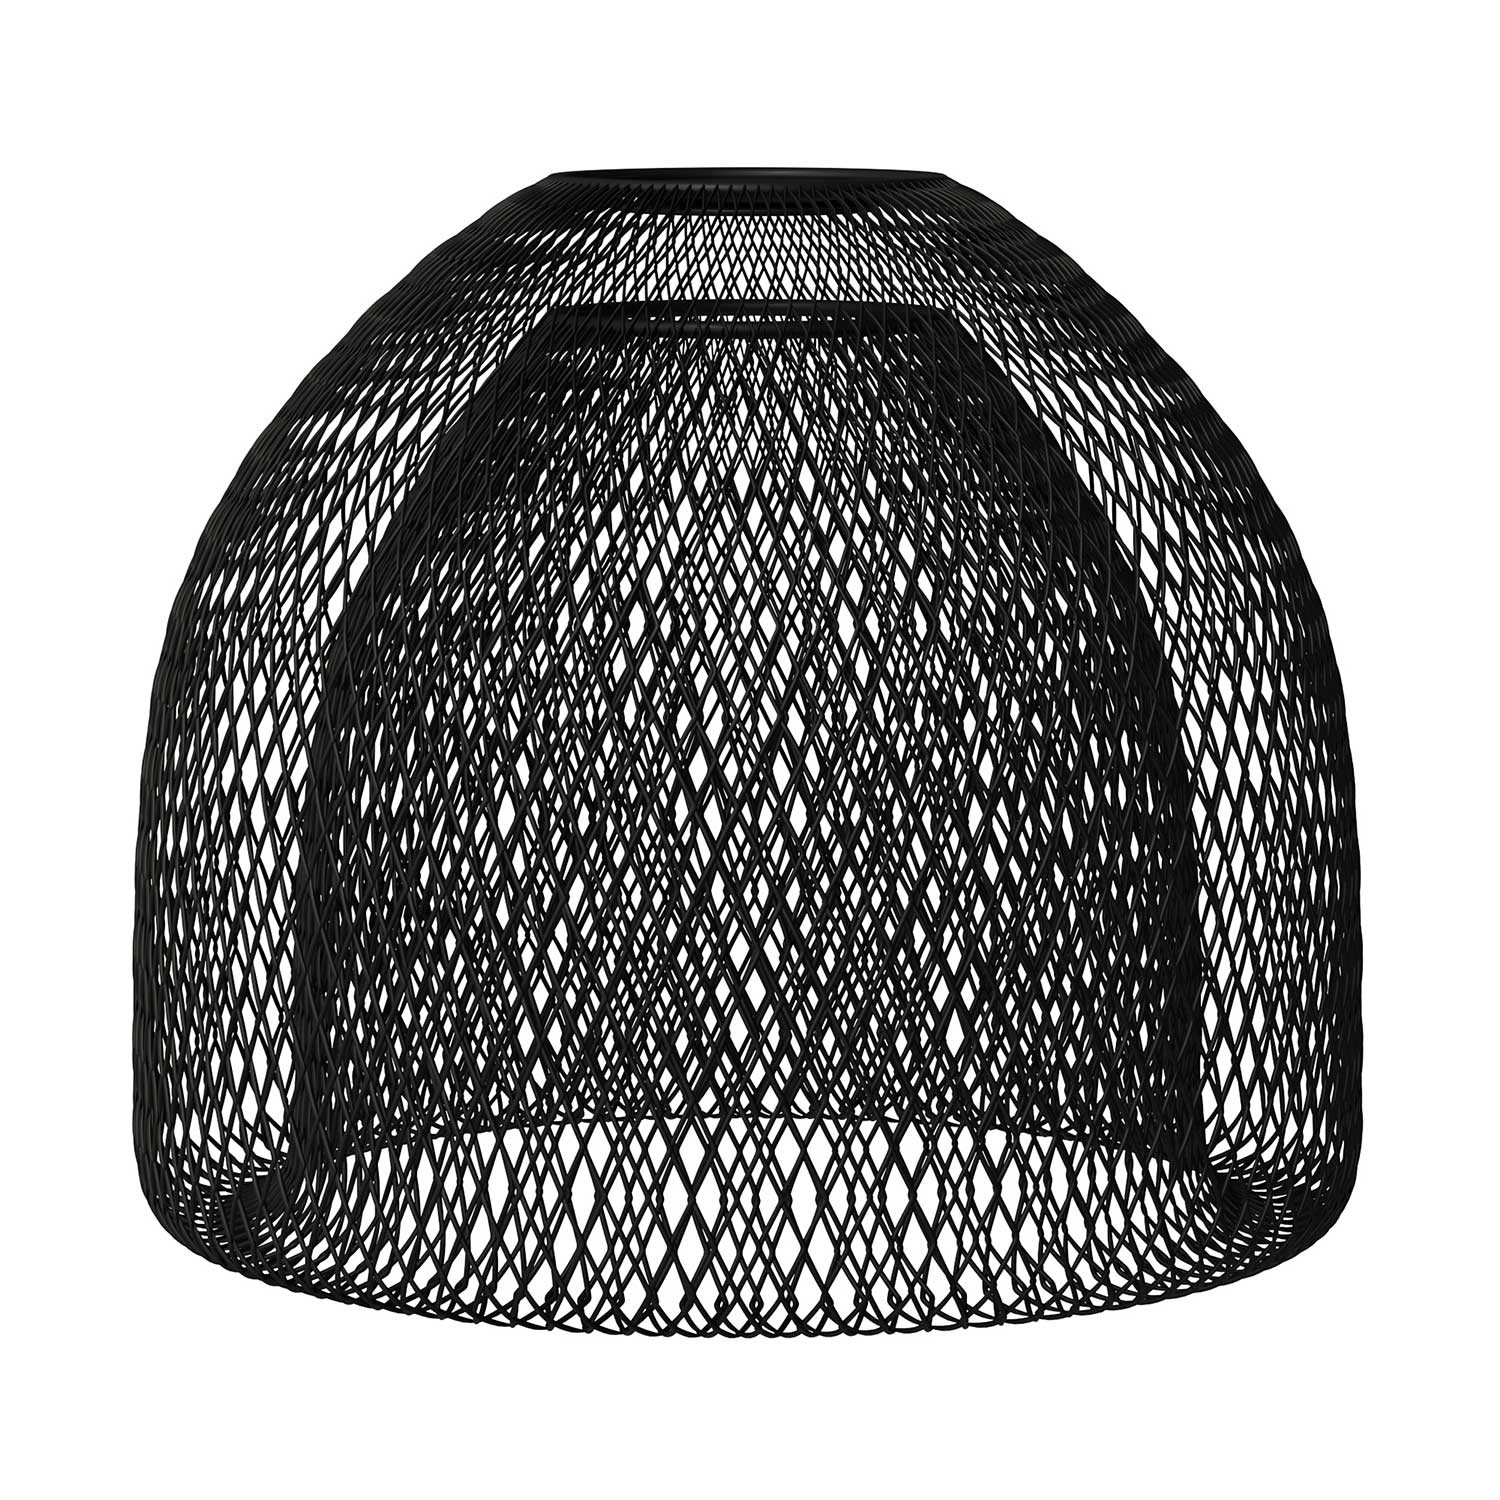 XL Ghostbell - The wire mesh pendant lampshade with socket cover